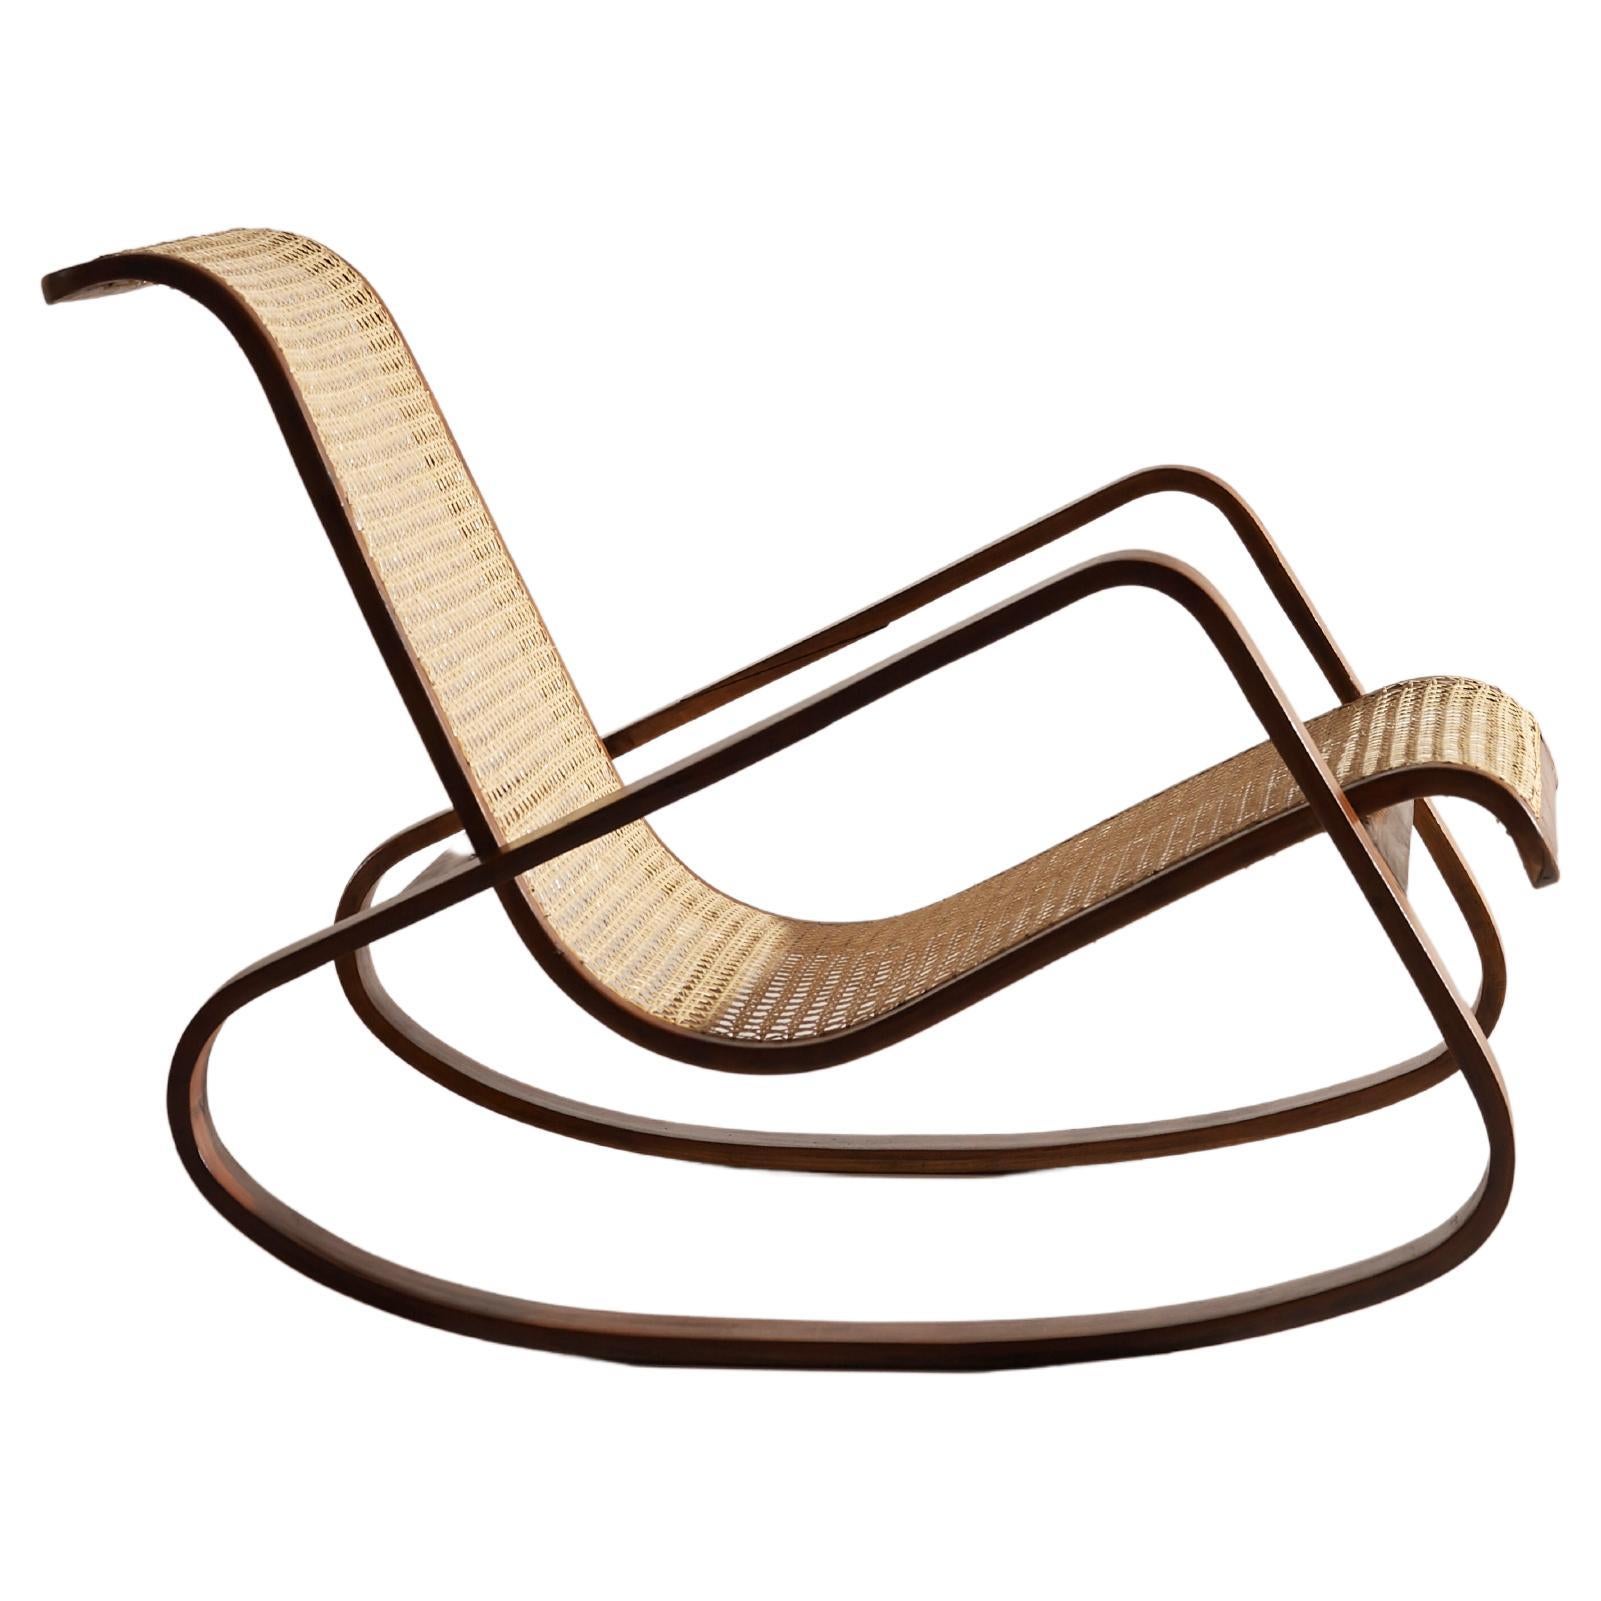 Caned Rocking Chair Made by Porino, Italy, 1930s For Sale